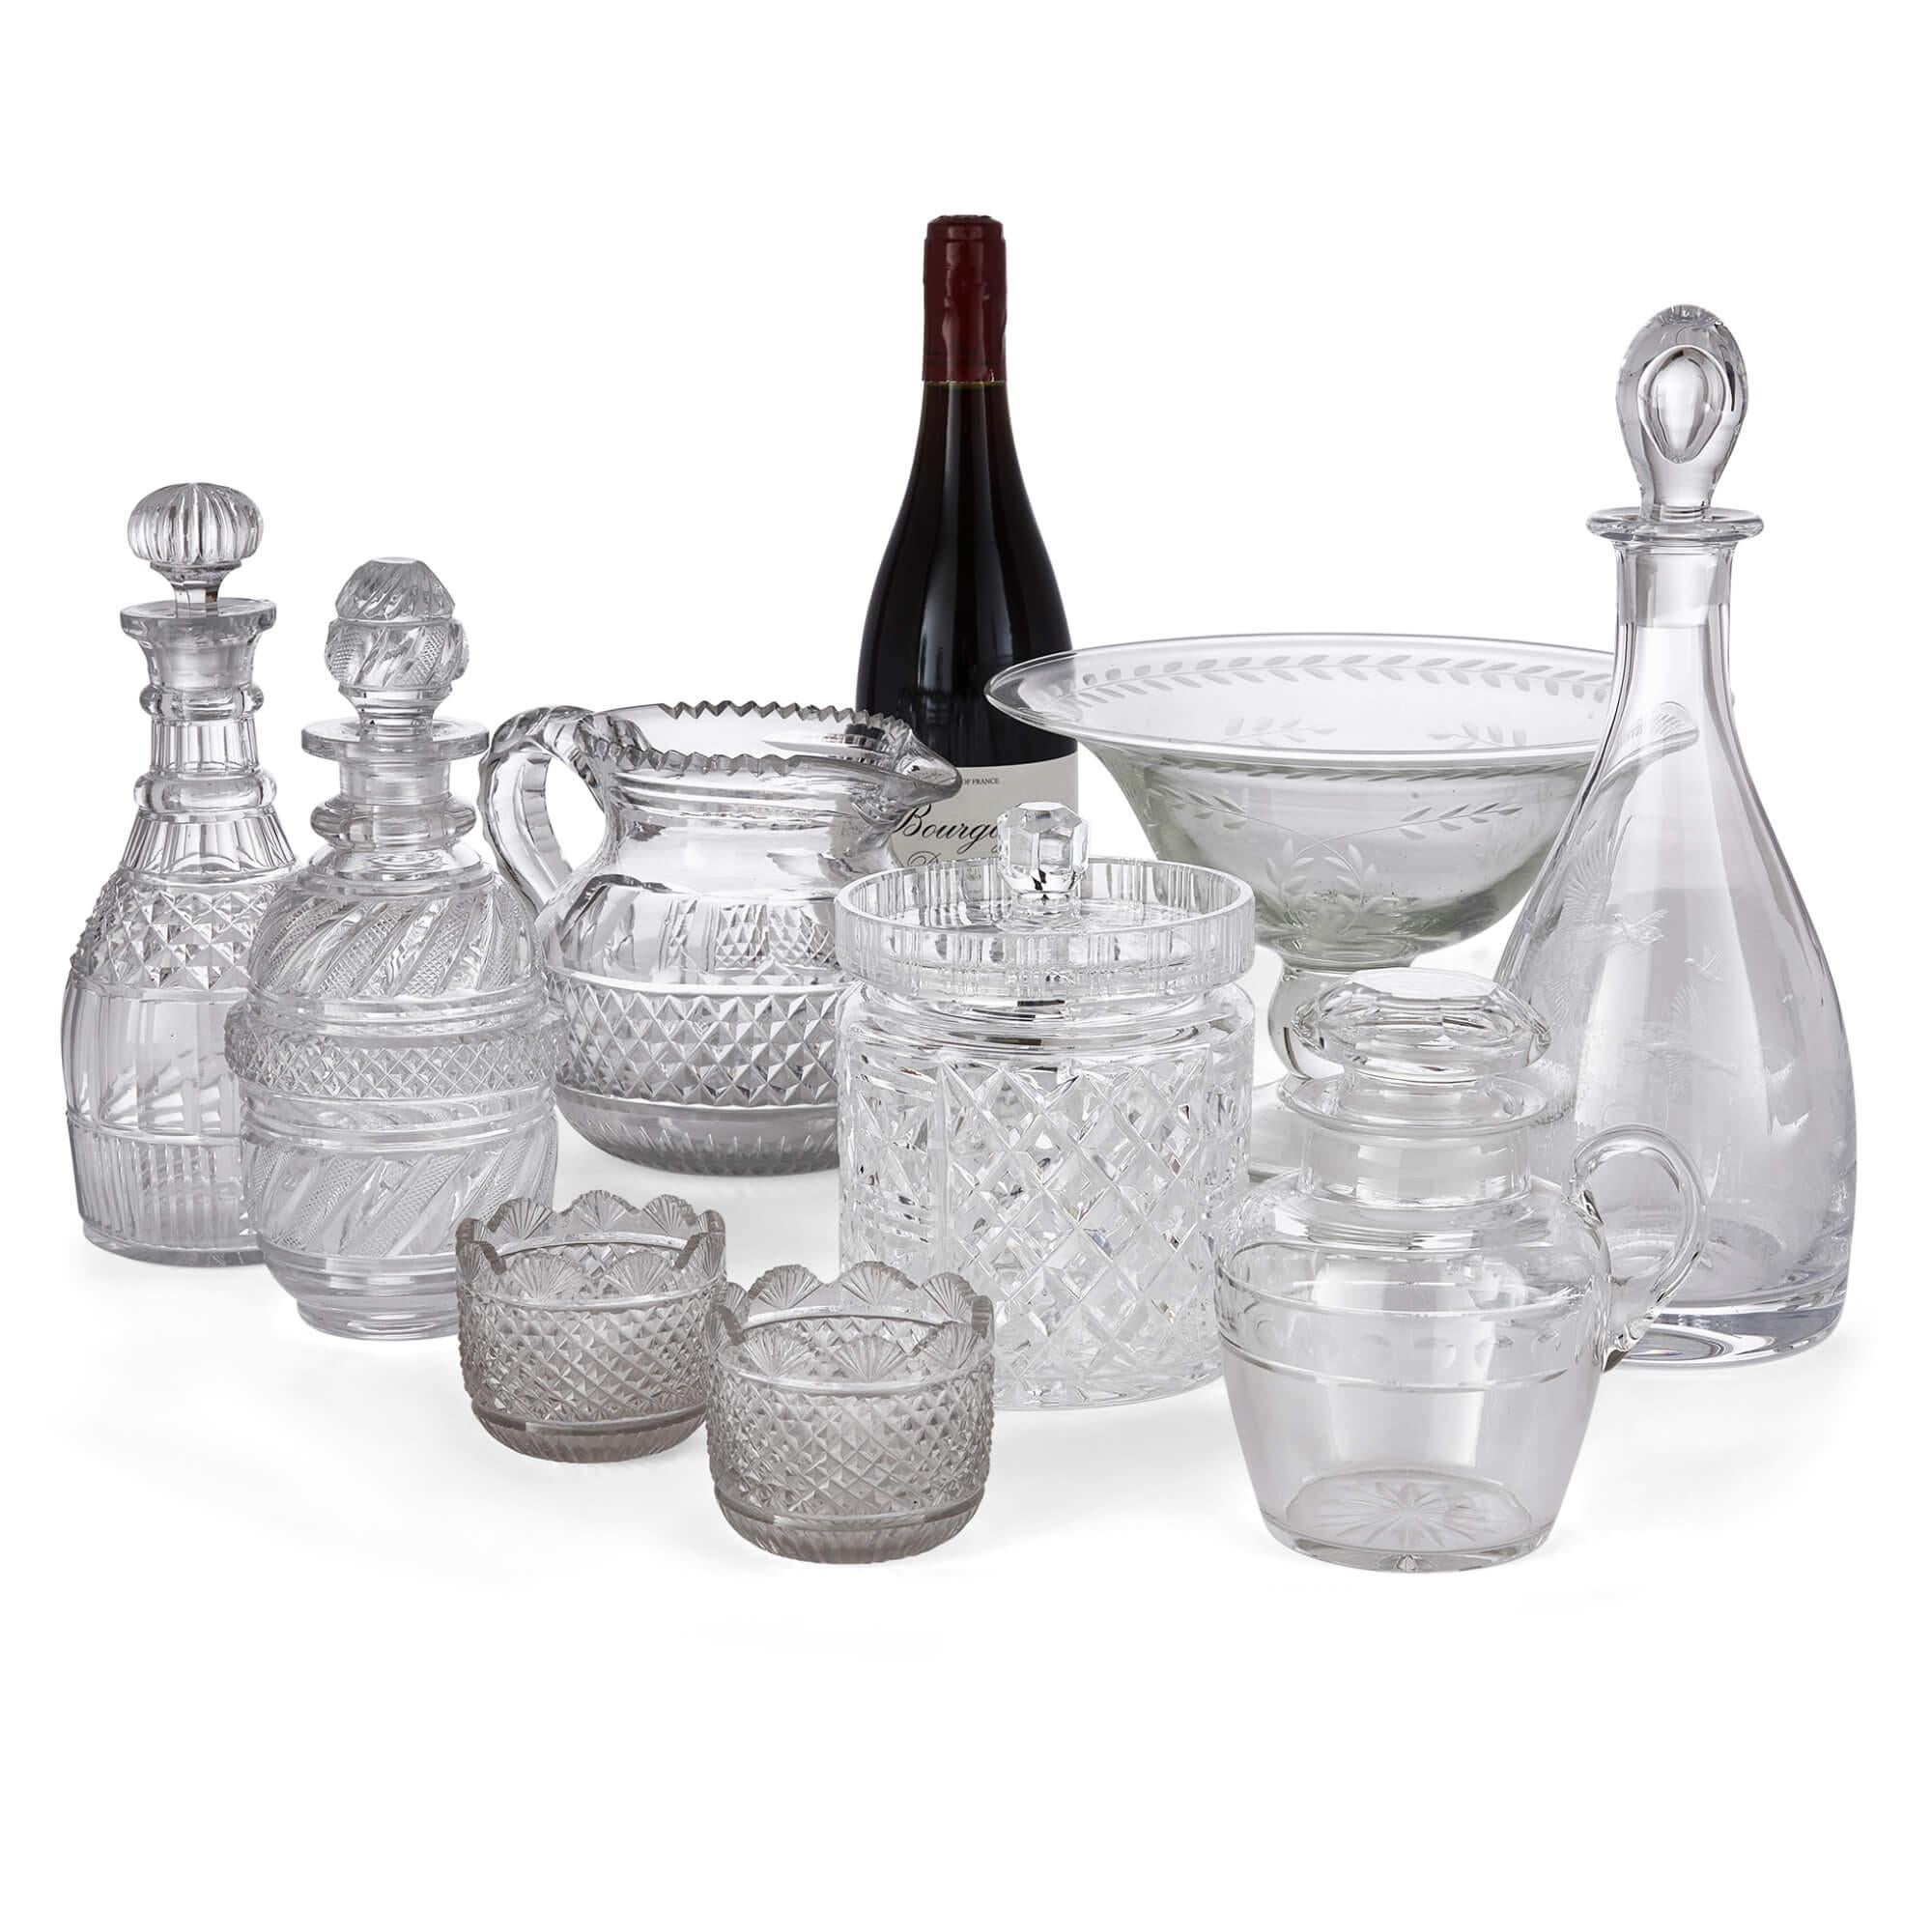 Collection of Engraved and Hobnail Cut Glassware, English, 20th Century For Sale 3